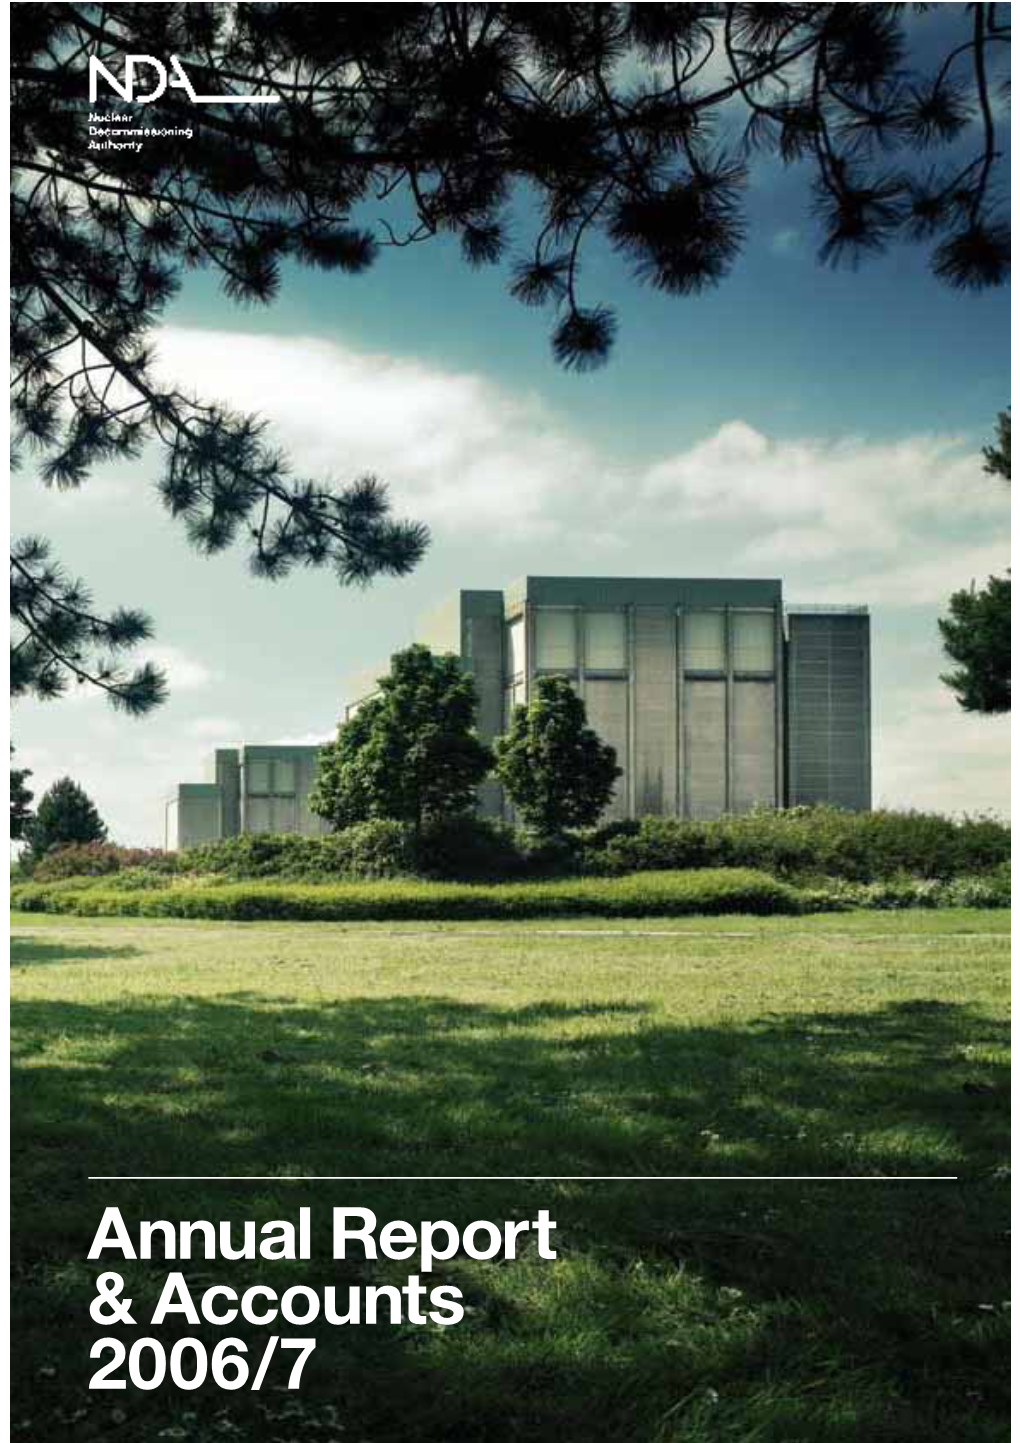 Nuclear Decommissioning Authority Annual Report and Accounts 2006